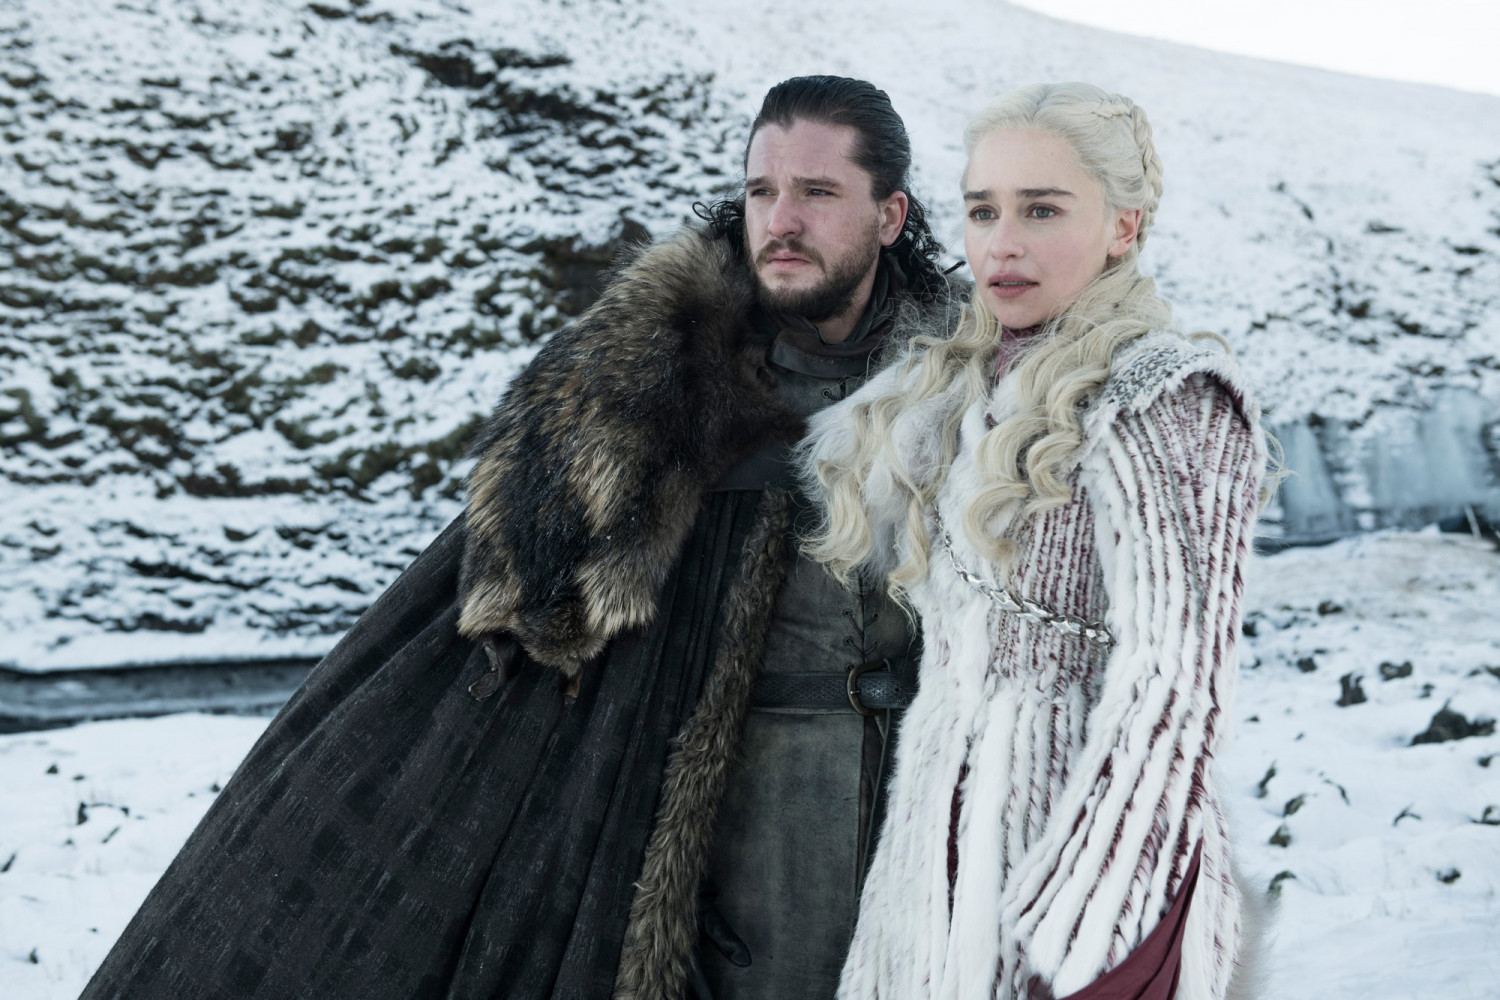 Game of Thrones Stars Kit Harington, Emilia Clarke, and Sophie Turner Comment on Controversial Finale